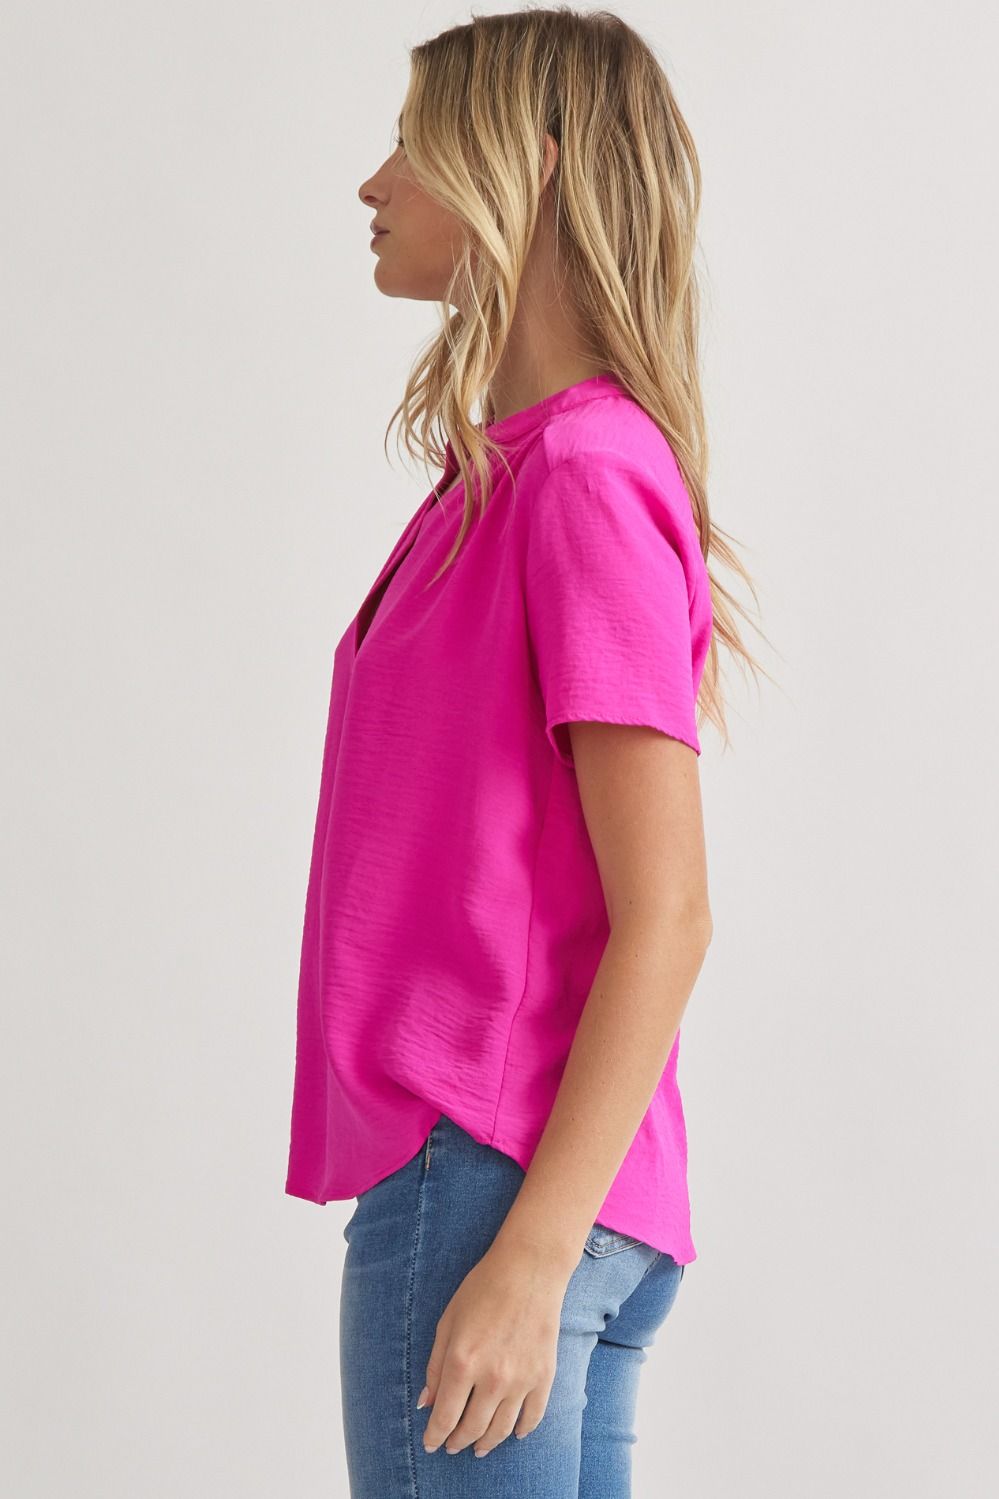 The Posey Pink Top